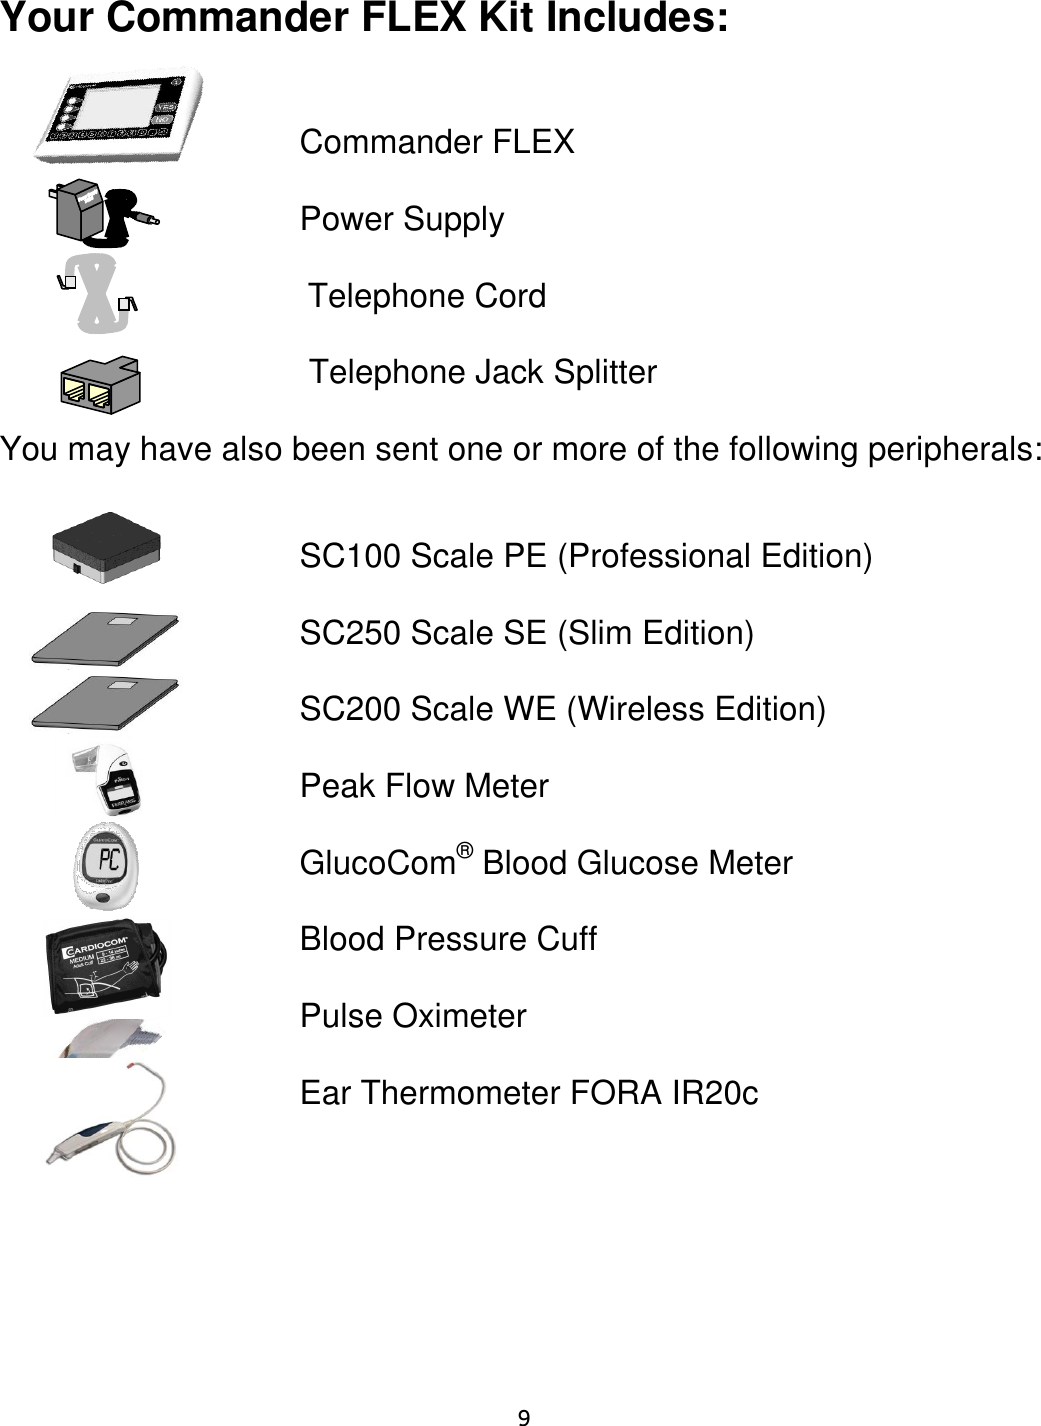     9  Your Commander FLEX Kit Includes:            Commander FLEX                 Power Supply                     Telephone Cord               Telephone Jack Splitter  You may have also been sent one or more of the following peripherals:                 SC100 Scale PE (Professional Edition)                 SC250 Scale SE (Slim Edition)            SC200 Scale WE (Wireless Edition)               Peak Flow Meter                GlucoCom® Blood Glucose Meter               Blood Pressure Cuff  Pulse Oximeter  Ear Thermometer FORA IR20c   